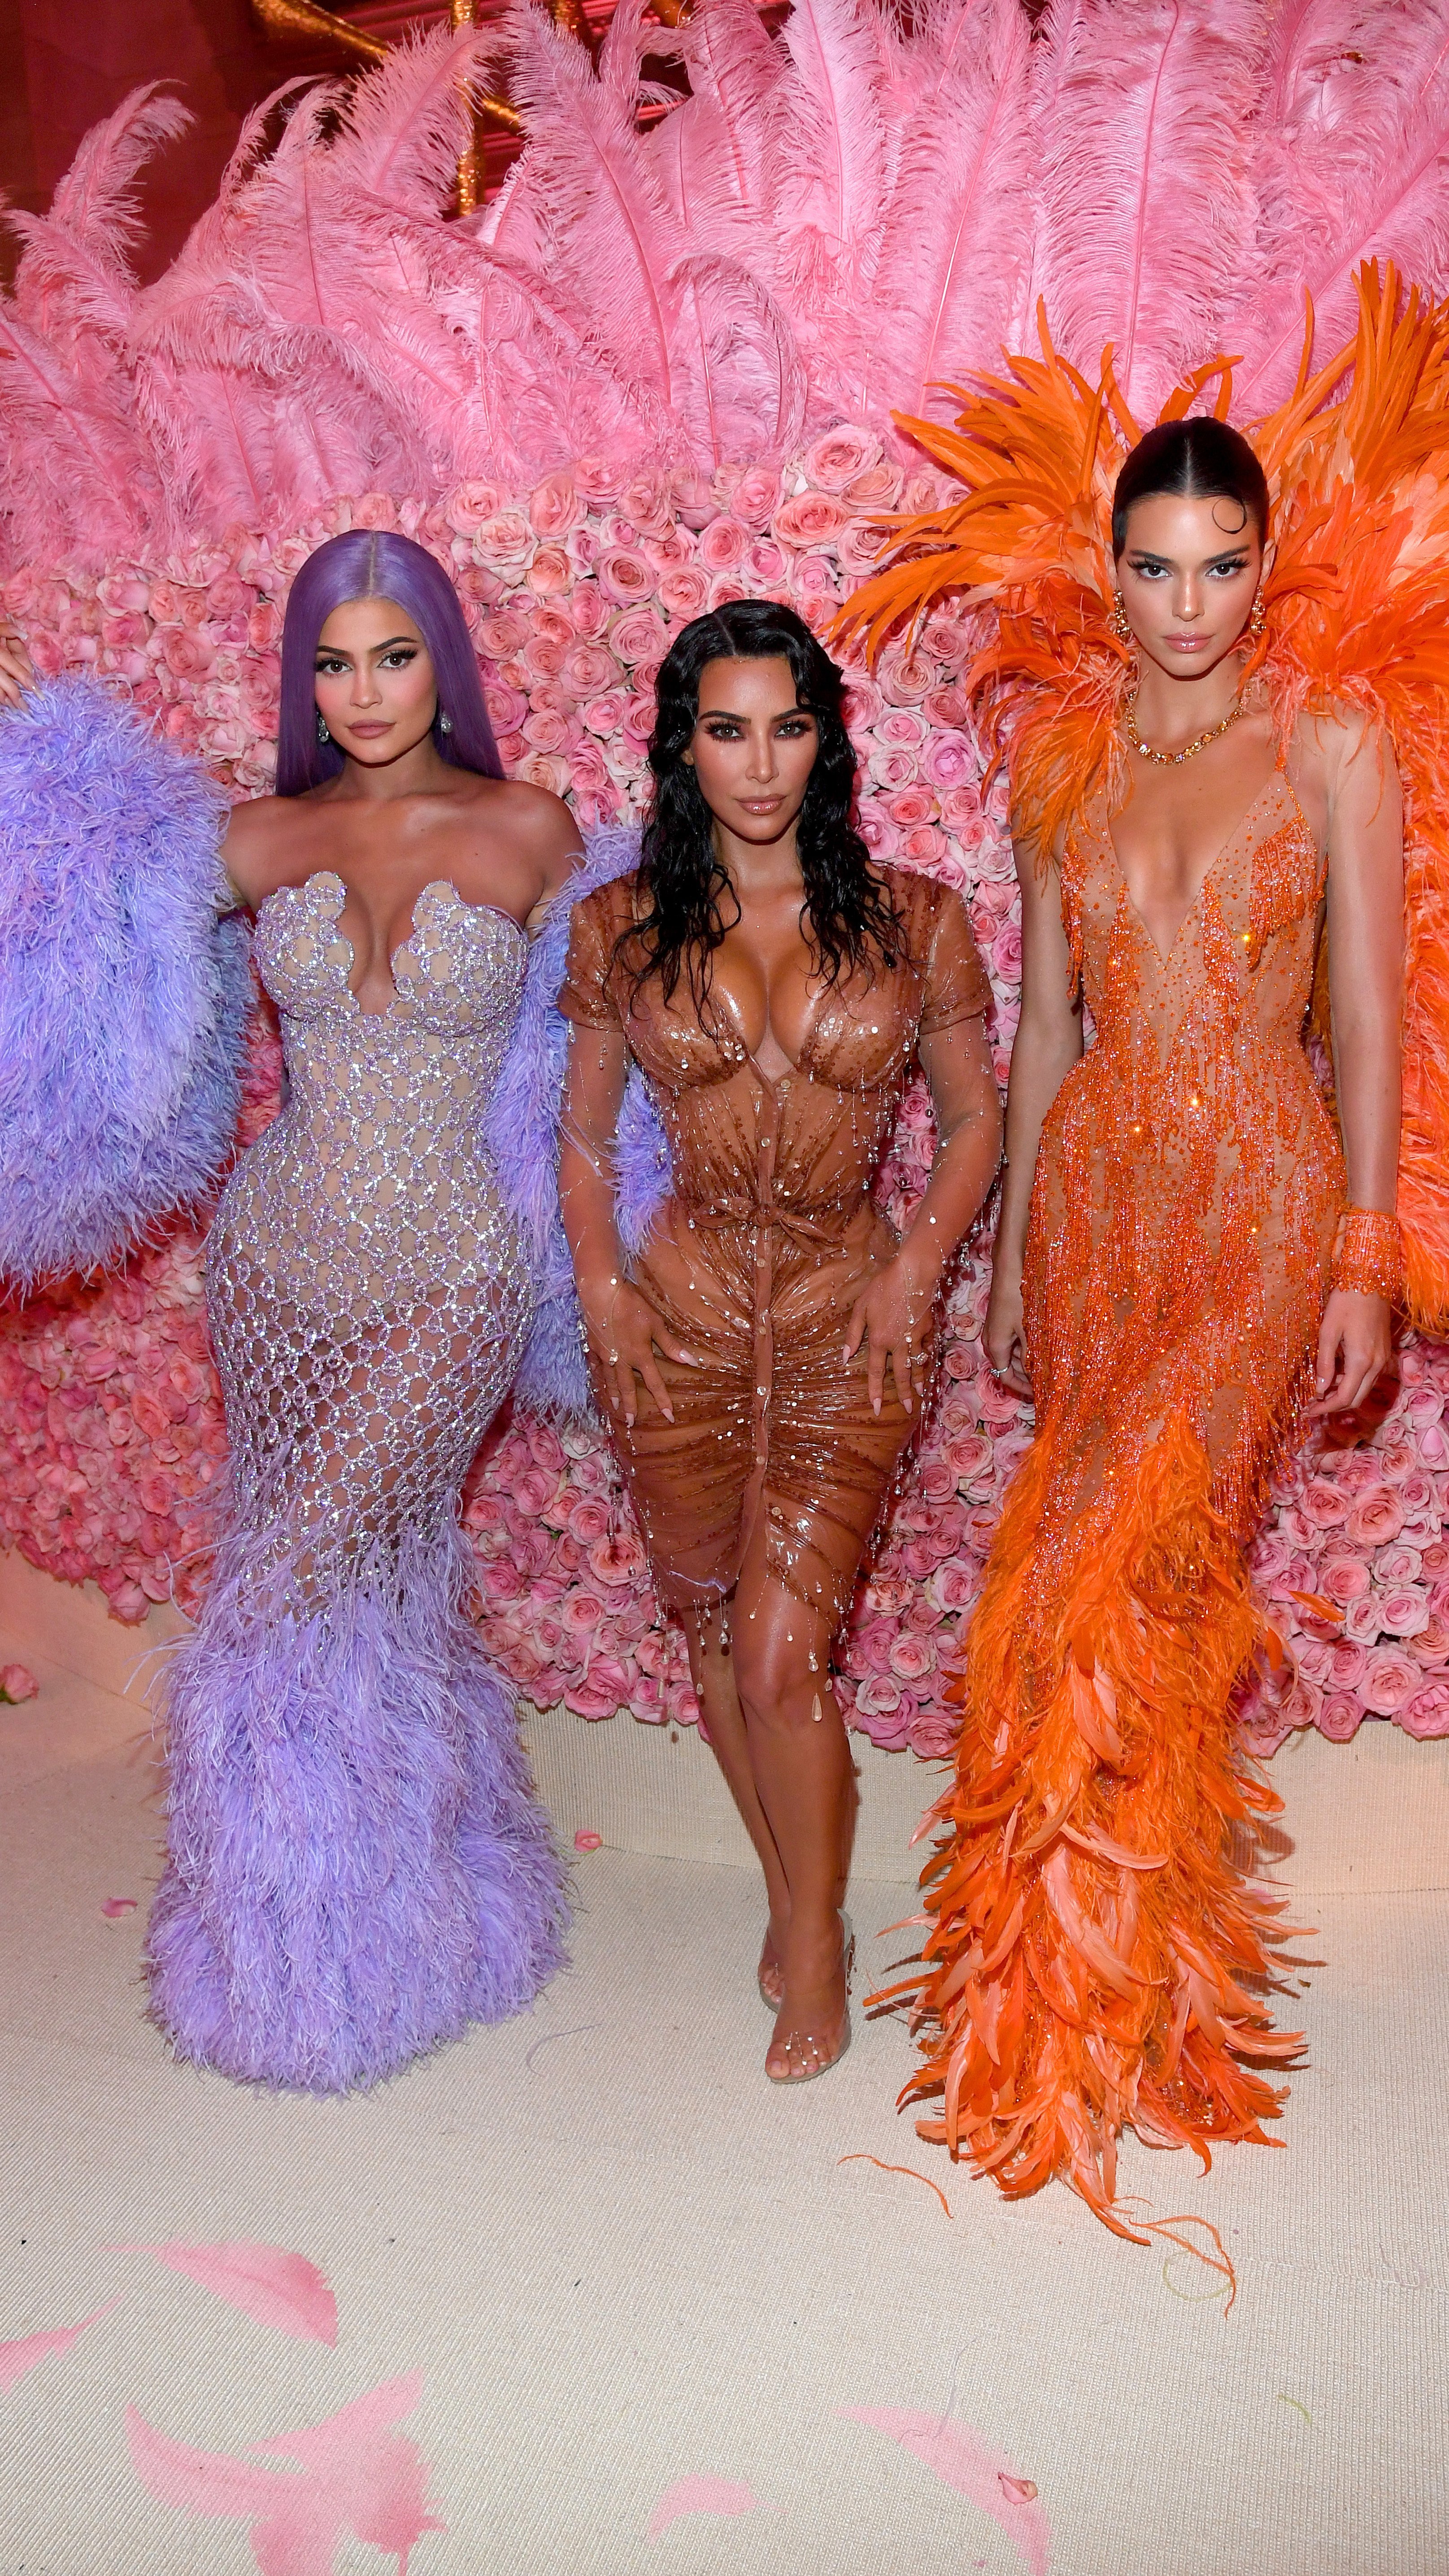 Kim Kardashian posing with sisters Kylie and Kendall Jenner at the 2019 Met Gala | Photo: Getty Images